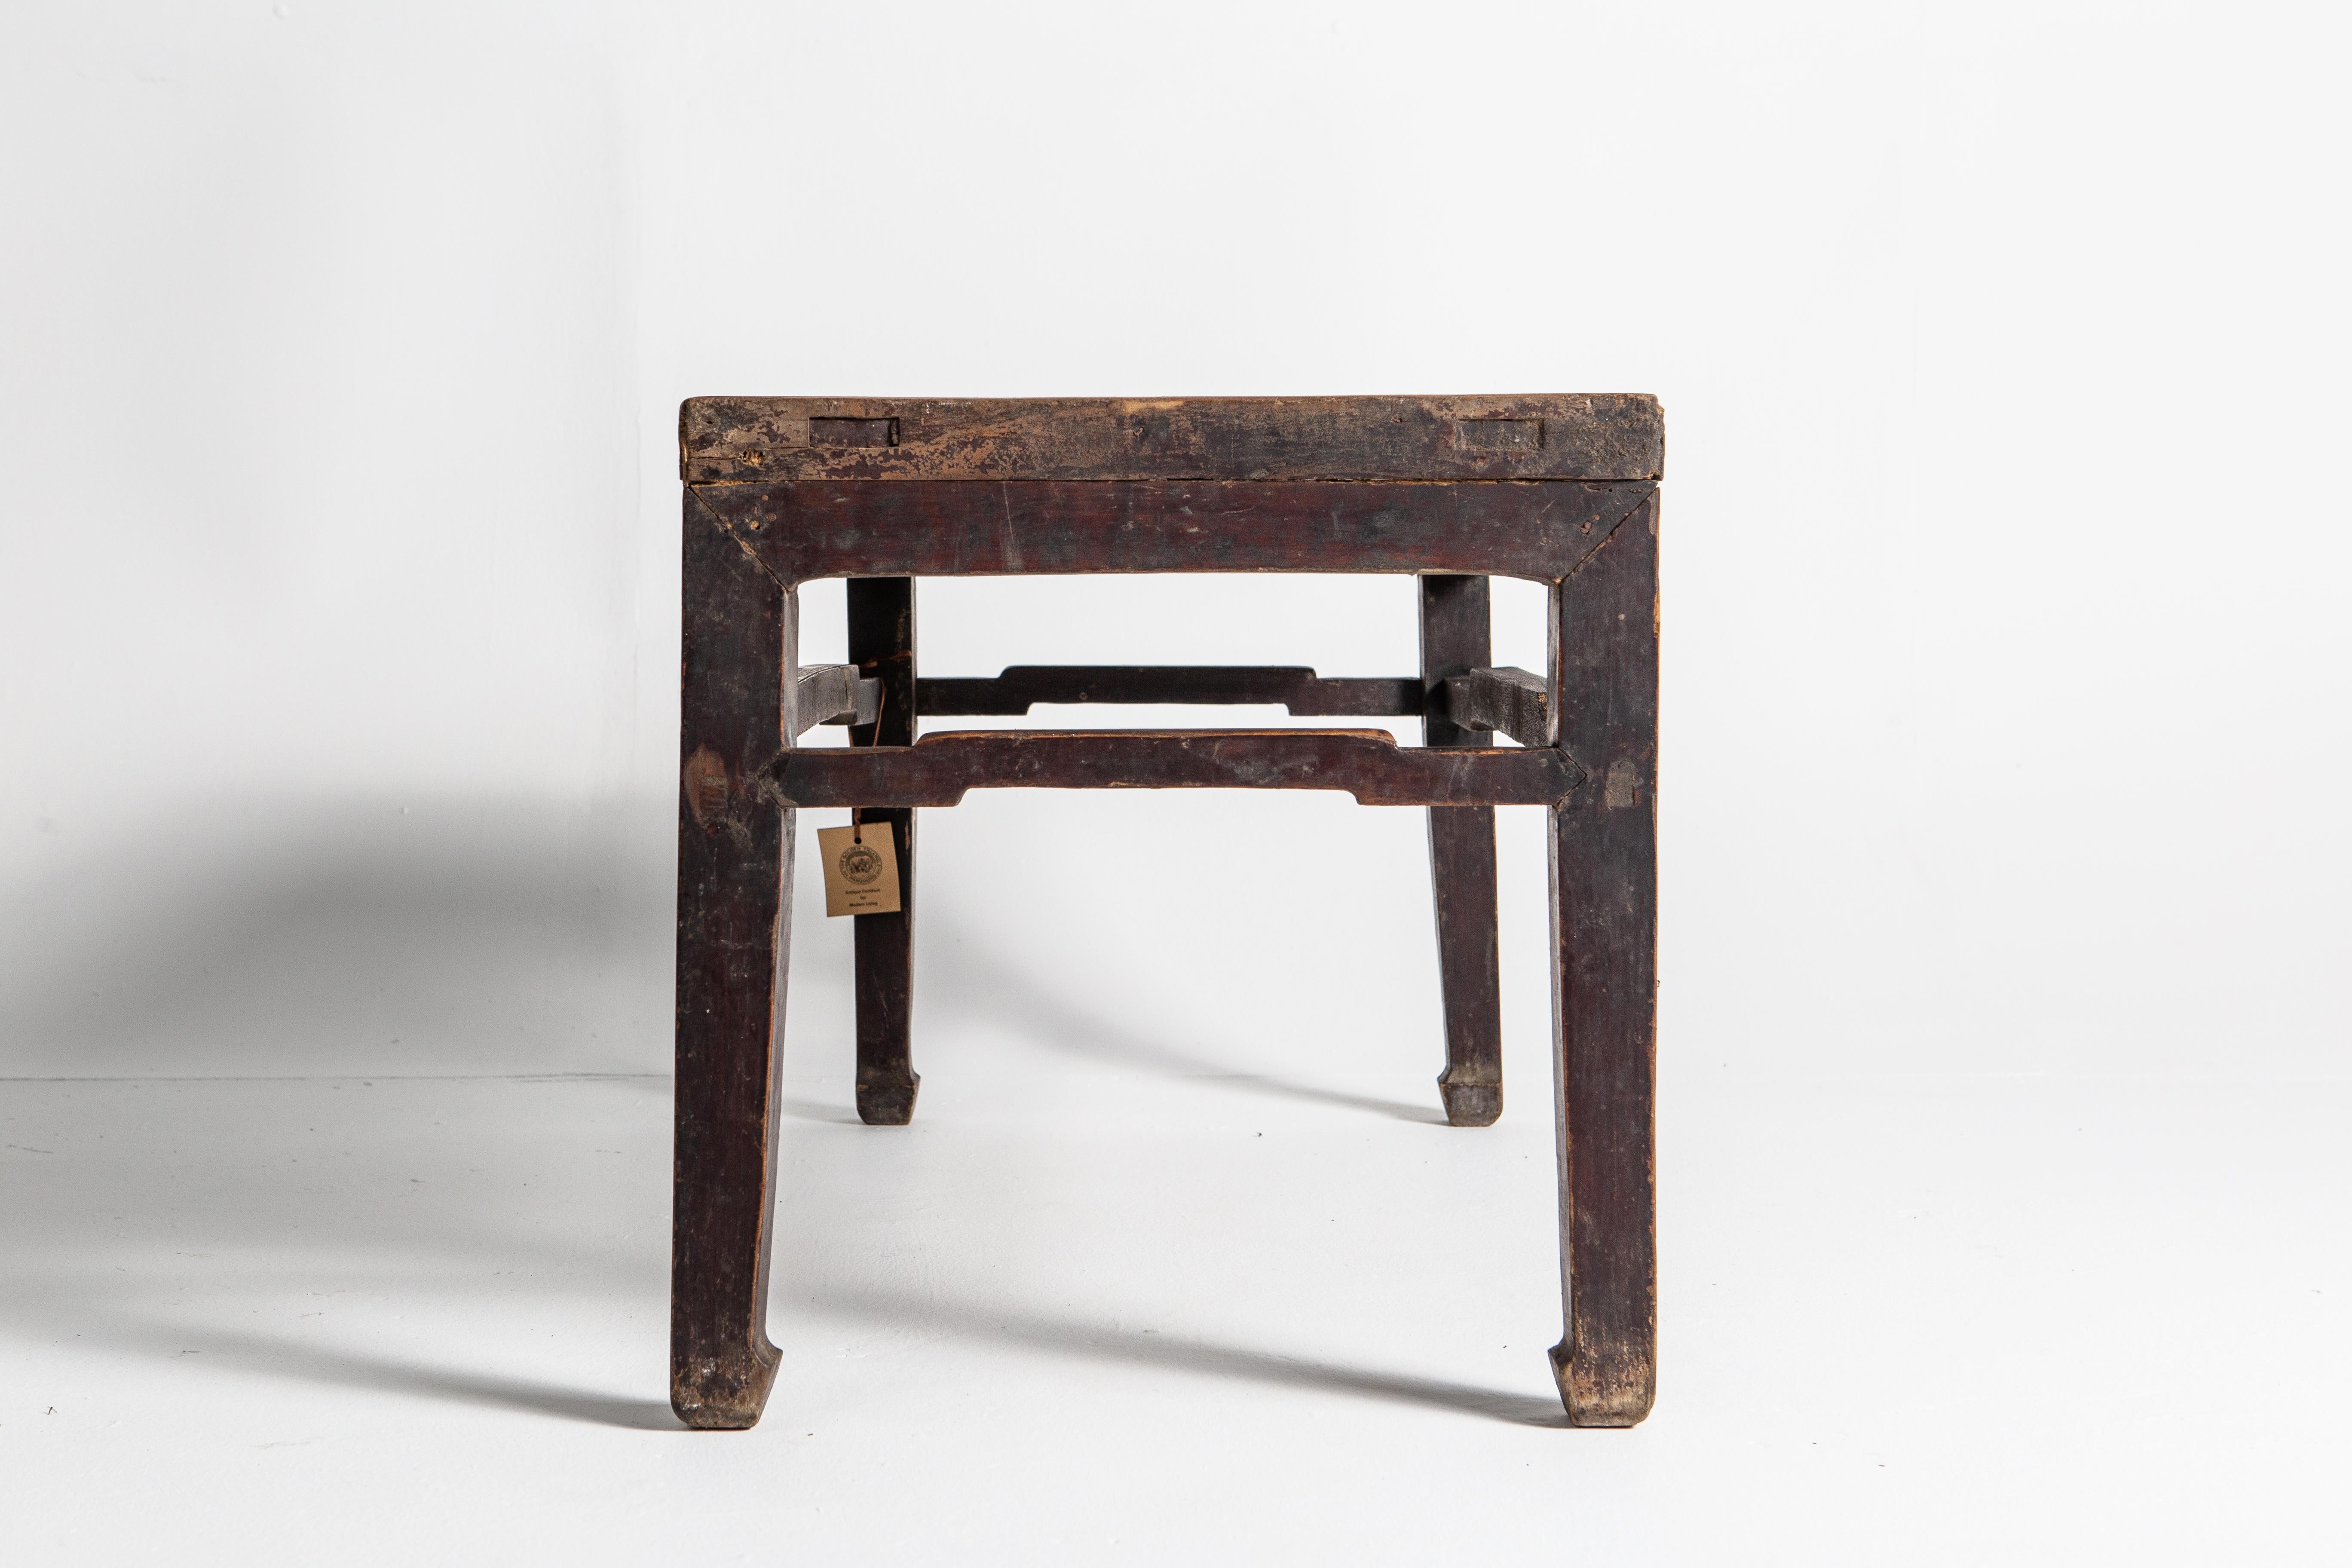 This table dates back to the Qing dynasty and was made from elm wood. The table features a beautiful aged patina; the lacquer is visibly worn on the elm wood top.